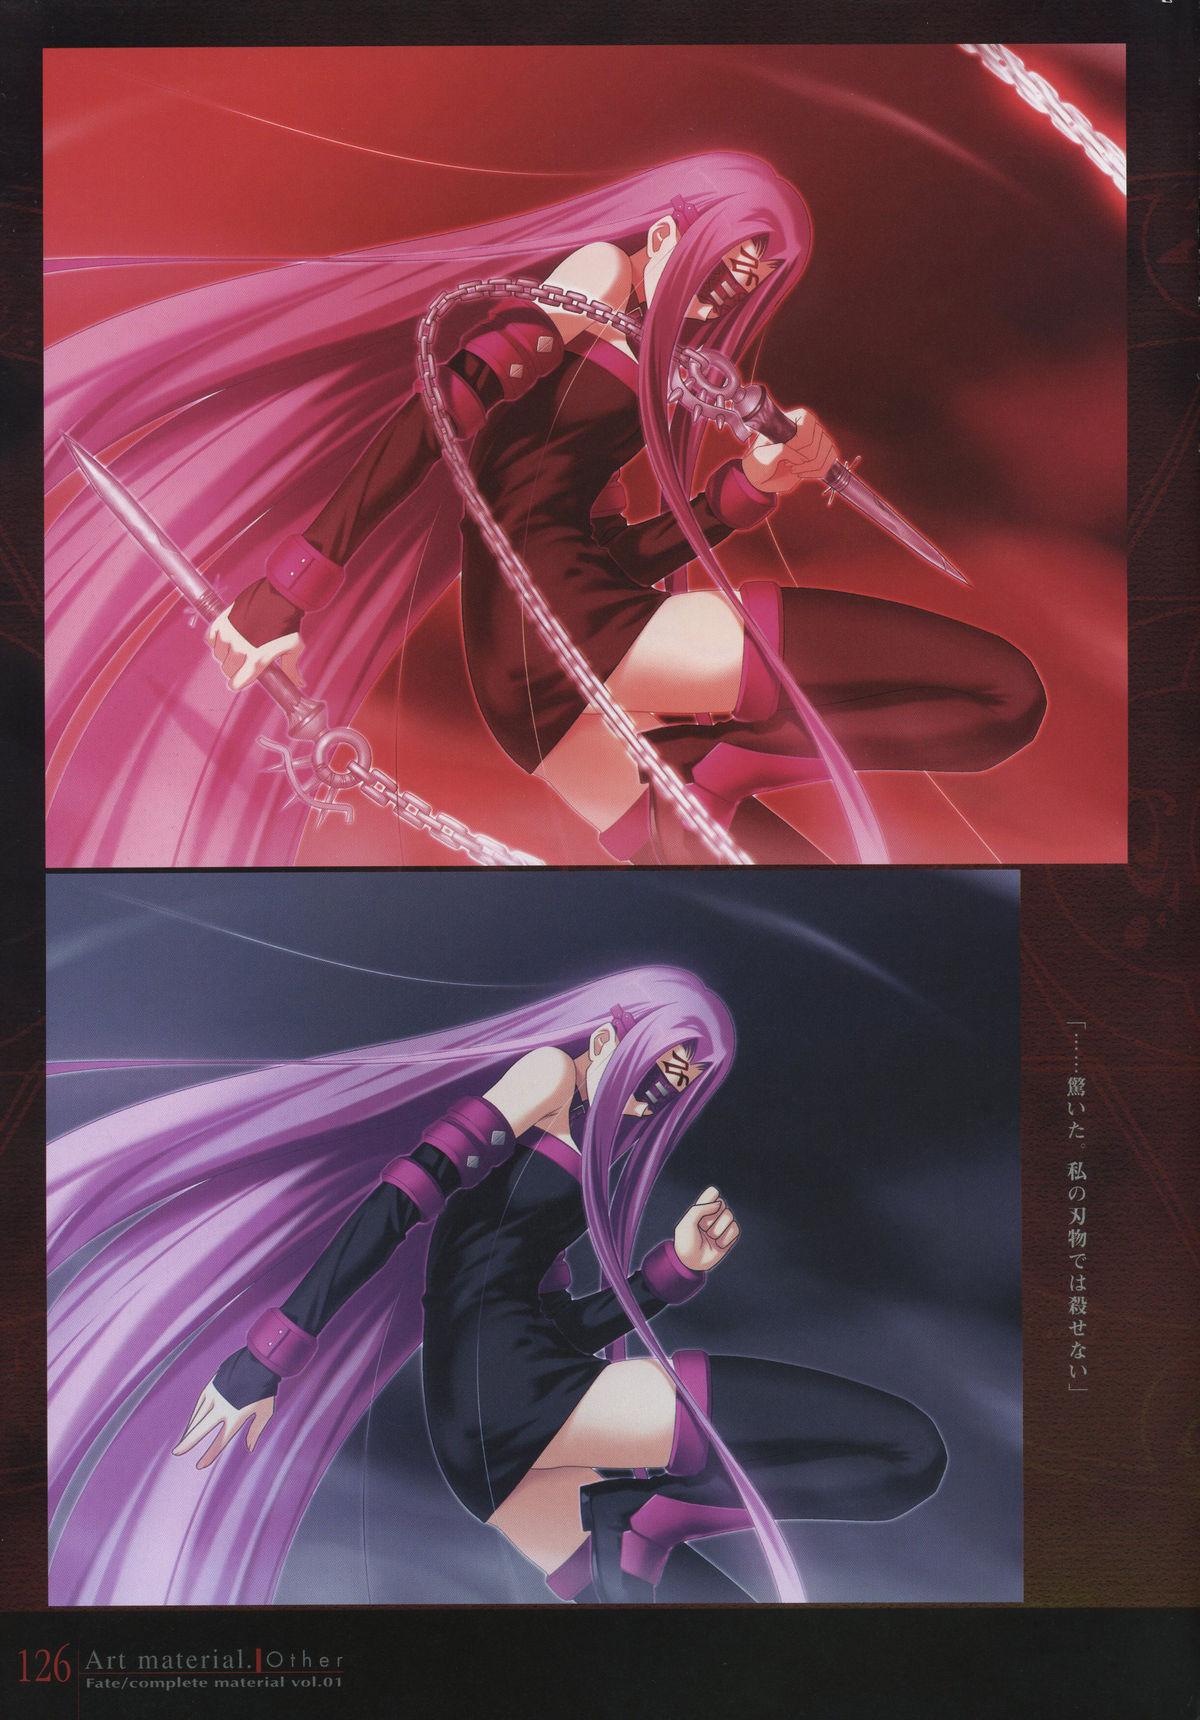 Fate/complete material I - Art material. 130